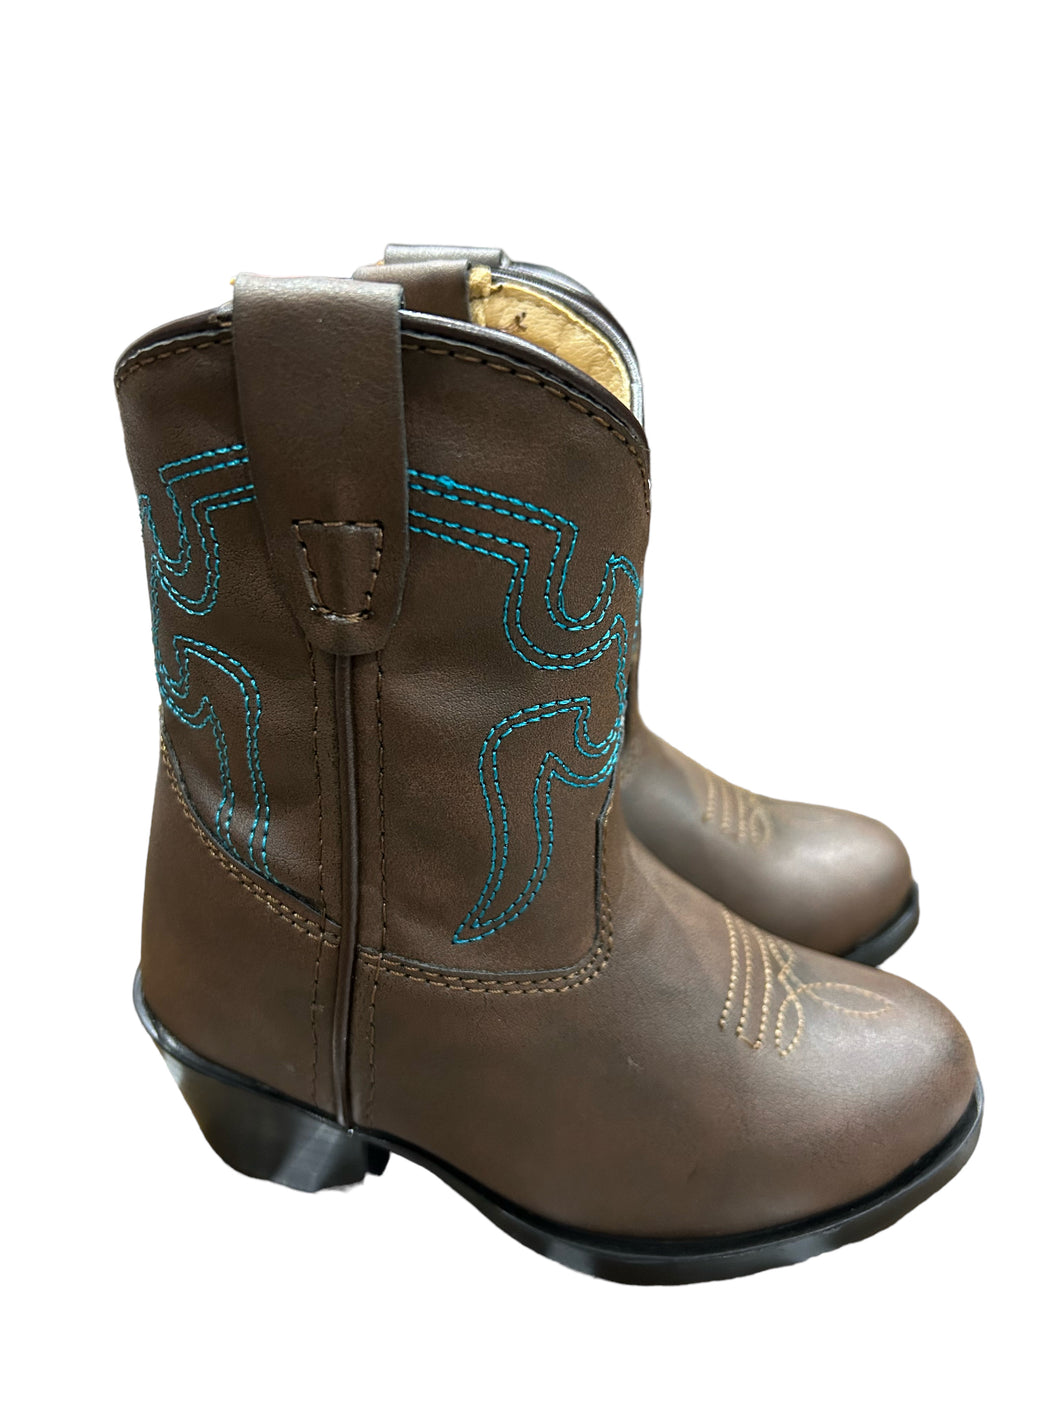 Smoky Mountain Boots 1623T Monterey Brown/Blue Western Toddler Boots